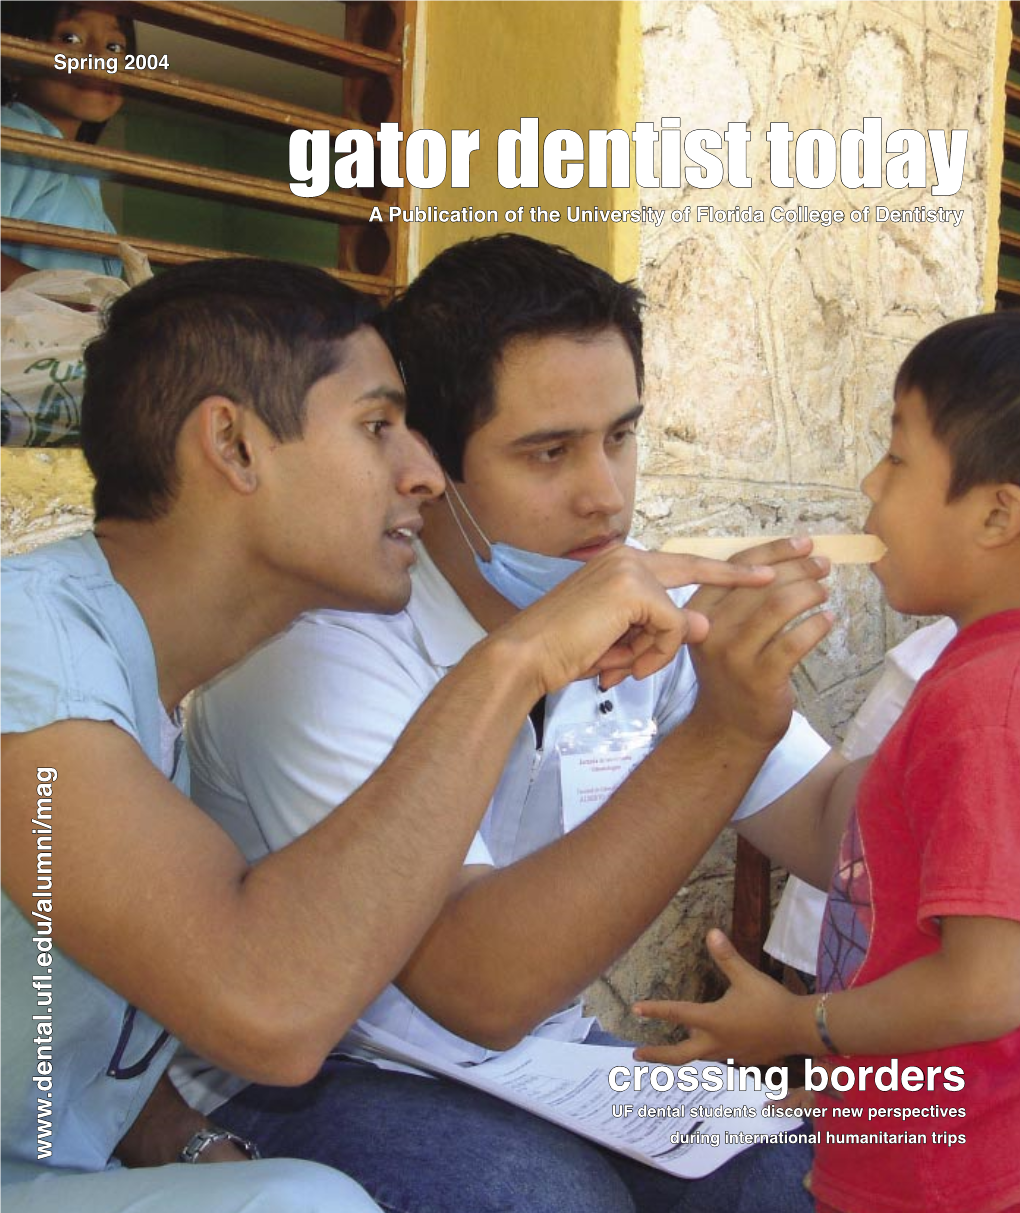 Gator Dentist Today a Publication of the University of Florida College of Dentistry